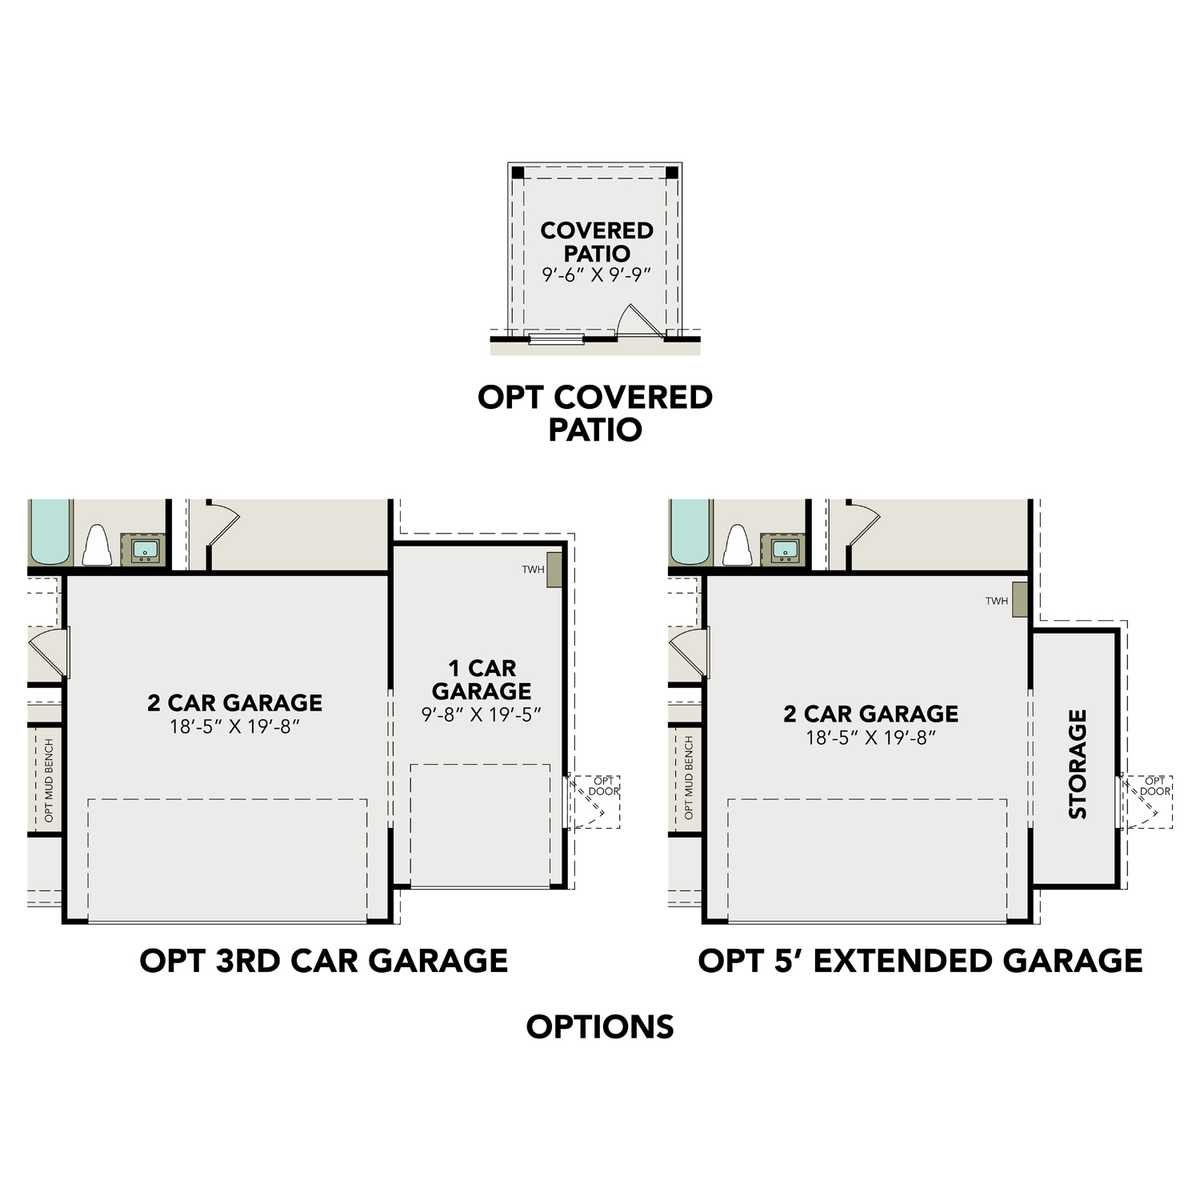 2 - The Frio Brick buildable floor plan layout in Davidson Homes' Caney Creek Place community.